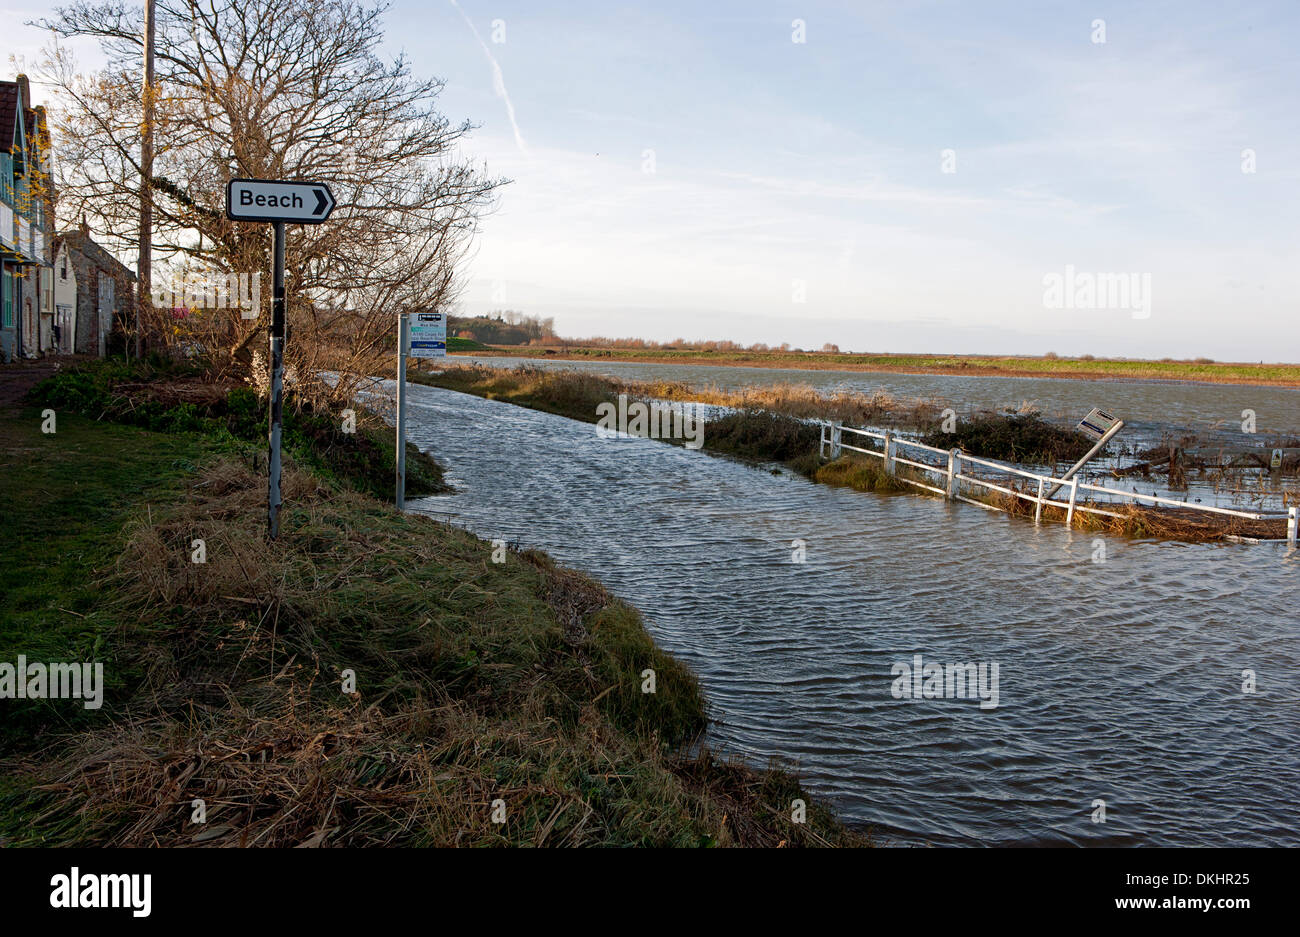 Cley, Norfolk, UK. 06th Dec, 2013. The main bus stop in the village of Cley lies underwater after storm surge waters breached sea defences and flooded the main coastal road between Cromer and Wells-Next-The-Sea, the A149. December 6, 2013. Credit:  Tim James/The Gray Gallery/Alamy Live News Stock Photo